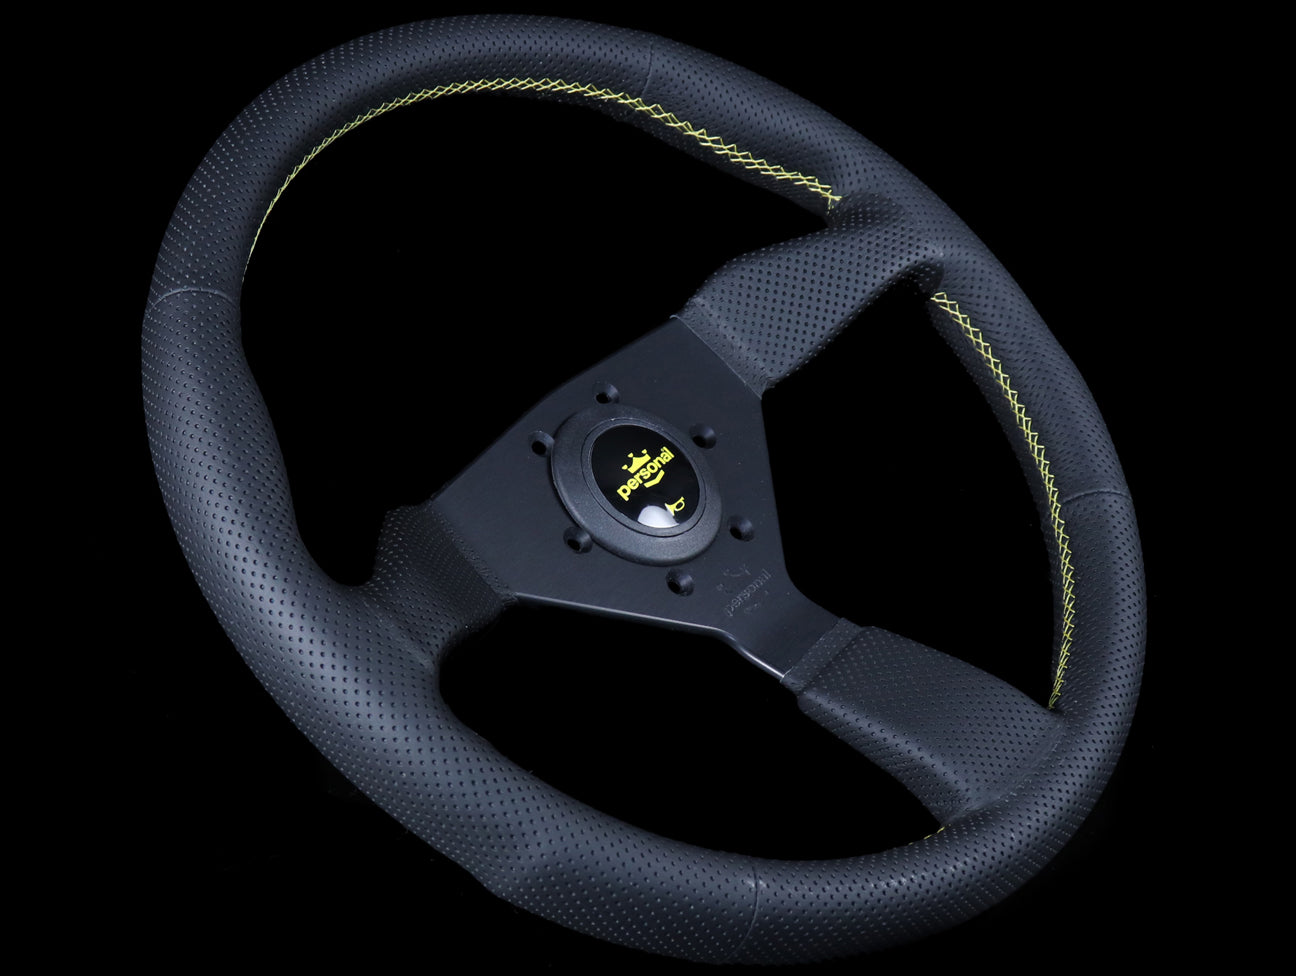 Personal Neo Grinta 350mm Steering Wheel - Black Perforated Leather / Yellow Stitch